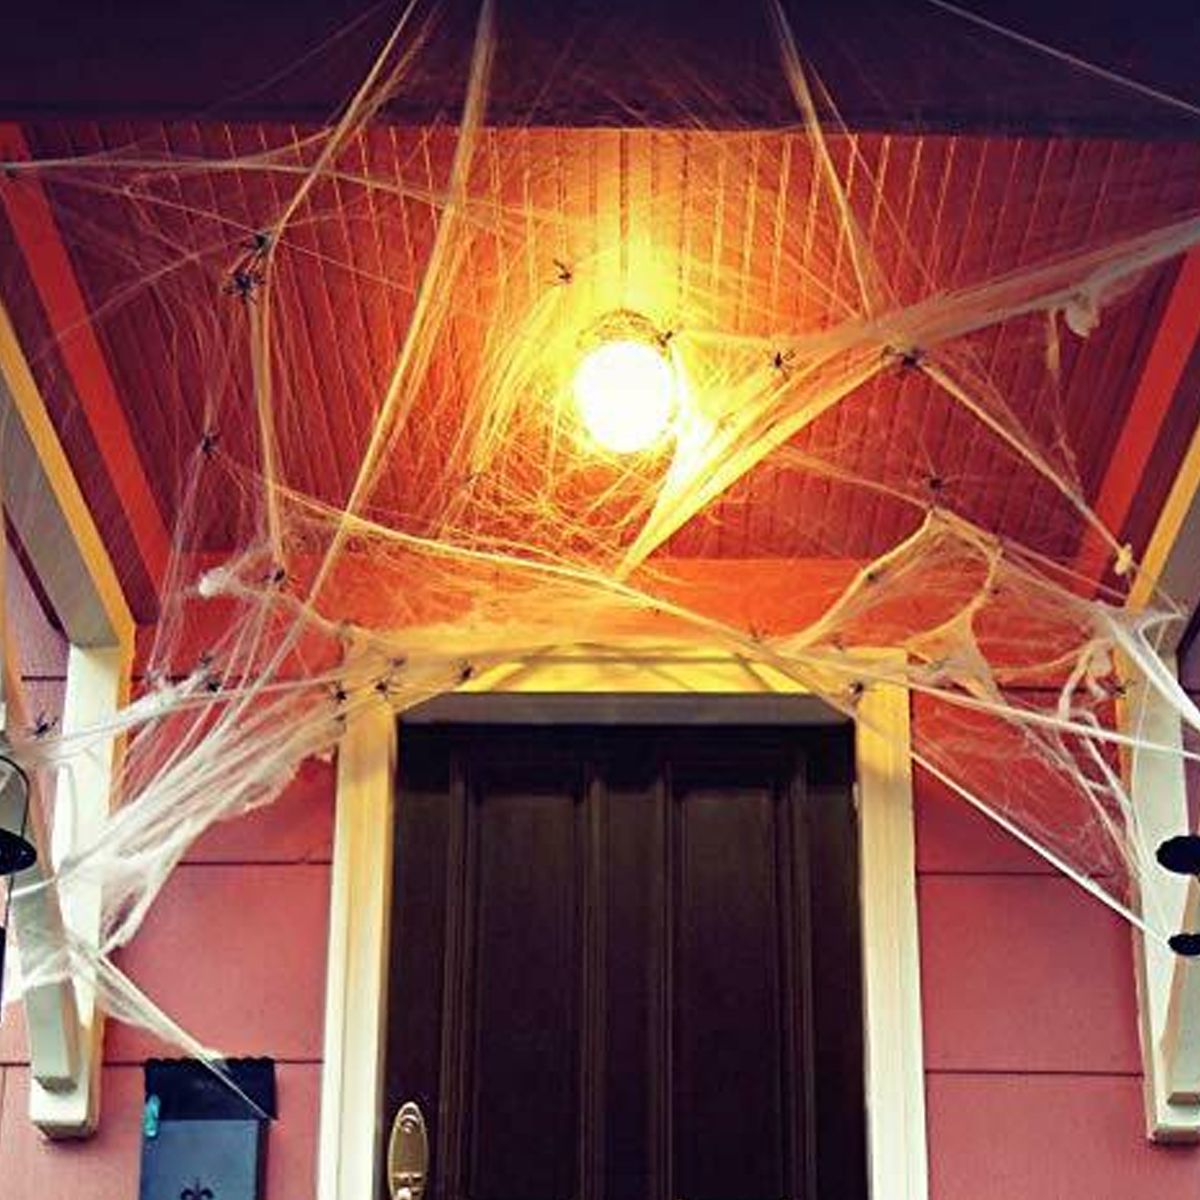 250g-Spider-Web-With-48Pcs-Small-Spiders-Halloween-Outdoor-Party-Decorations-Props-Supplies-1730880